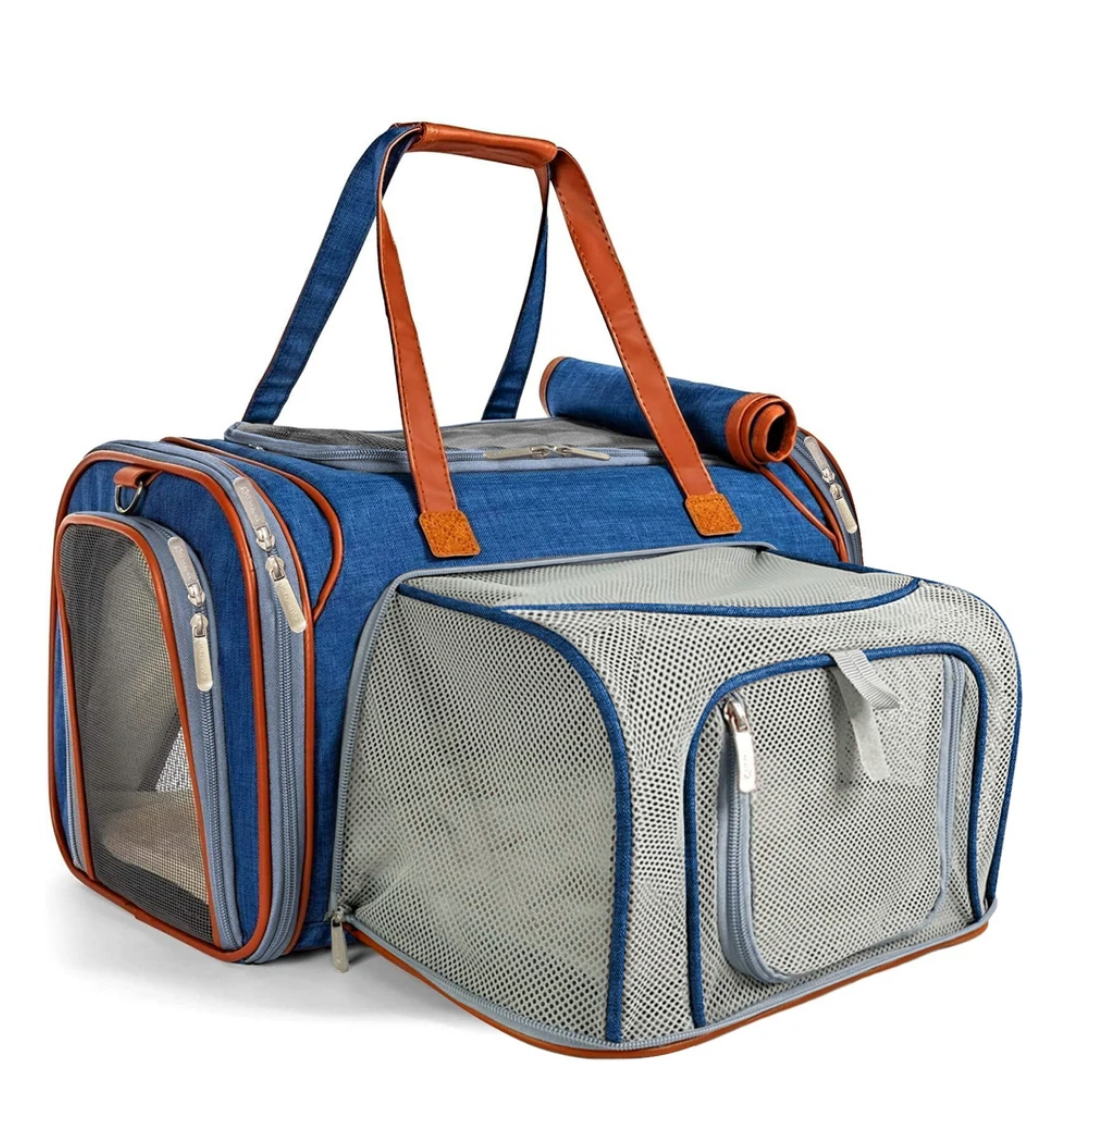 Expandable Cat Carrier Dog Carriers Airline Approved Soft-Sided